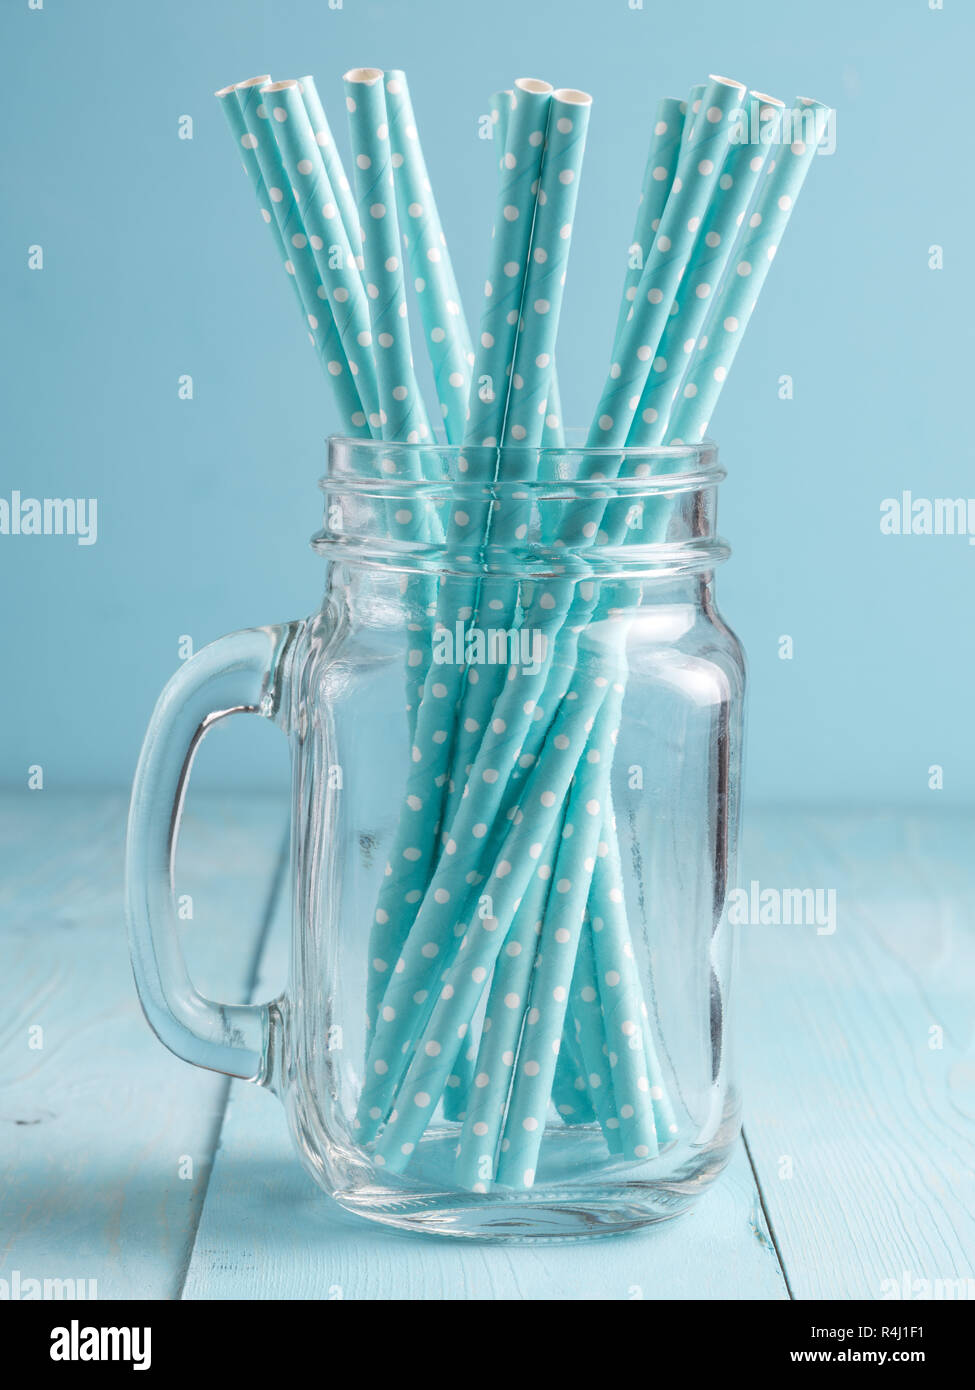 https://c8.alamy.com/comp/R4J1F1/mason-jars-with-yellow-paper-straws-and-cap-ideal-for-summer-drinks-and-smoothies-R4J1F1.jpg